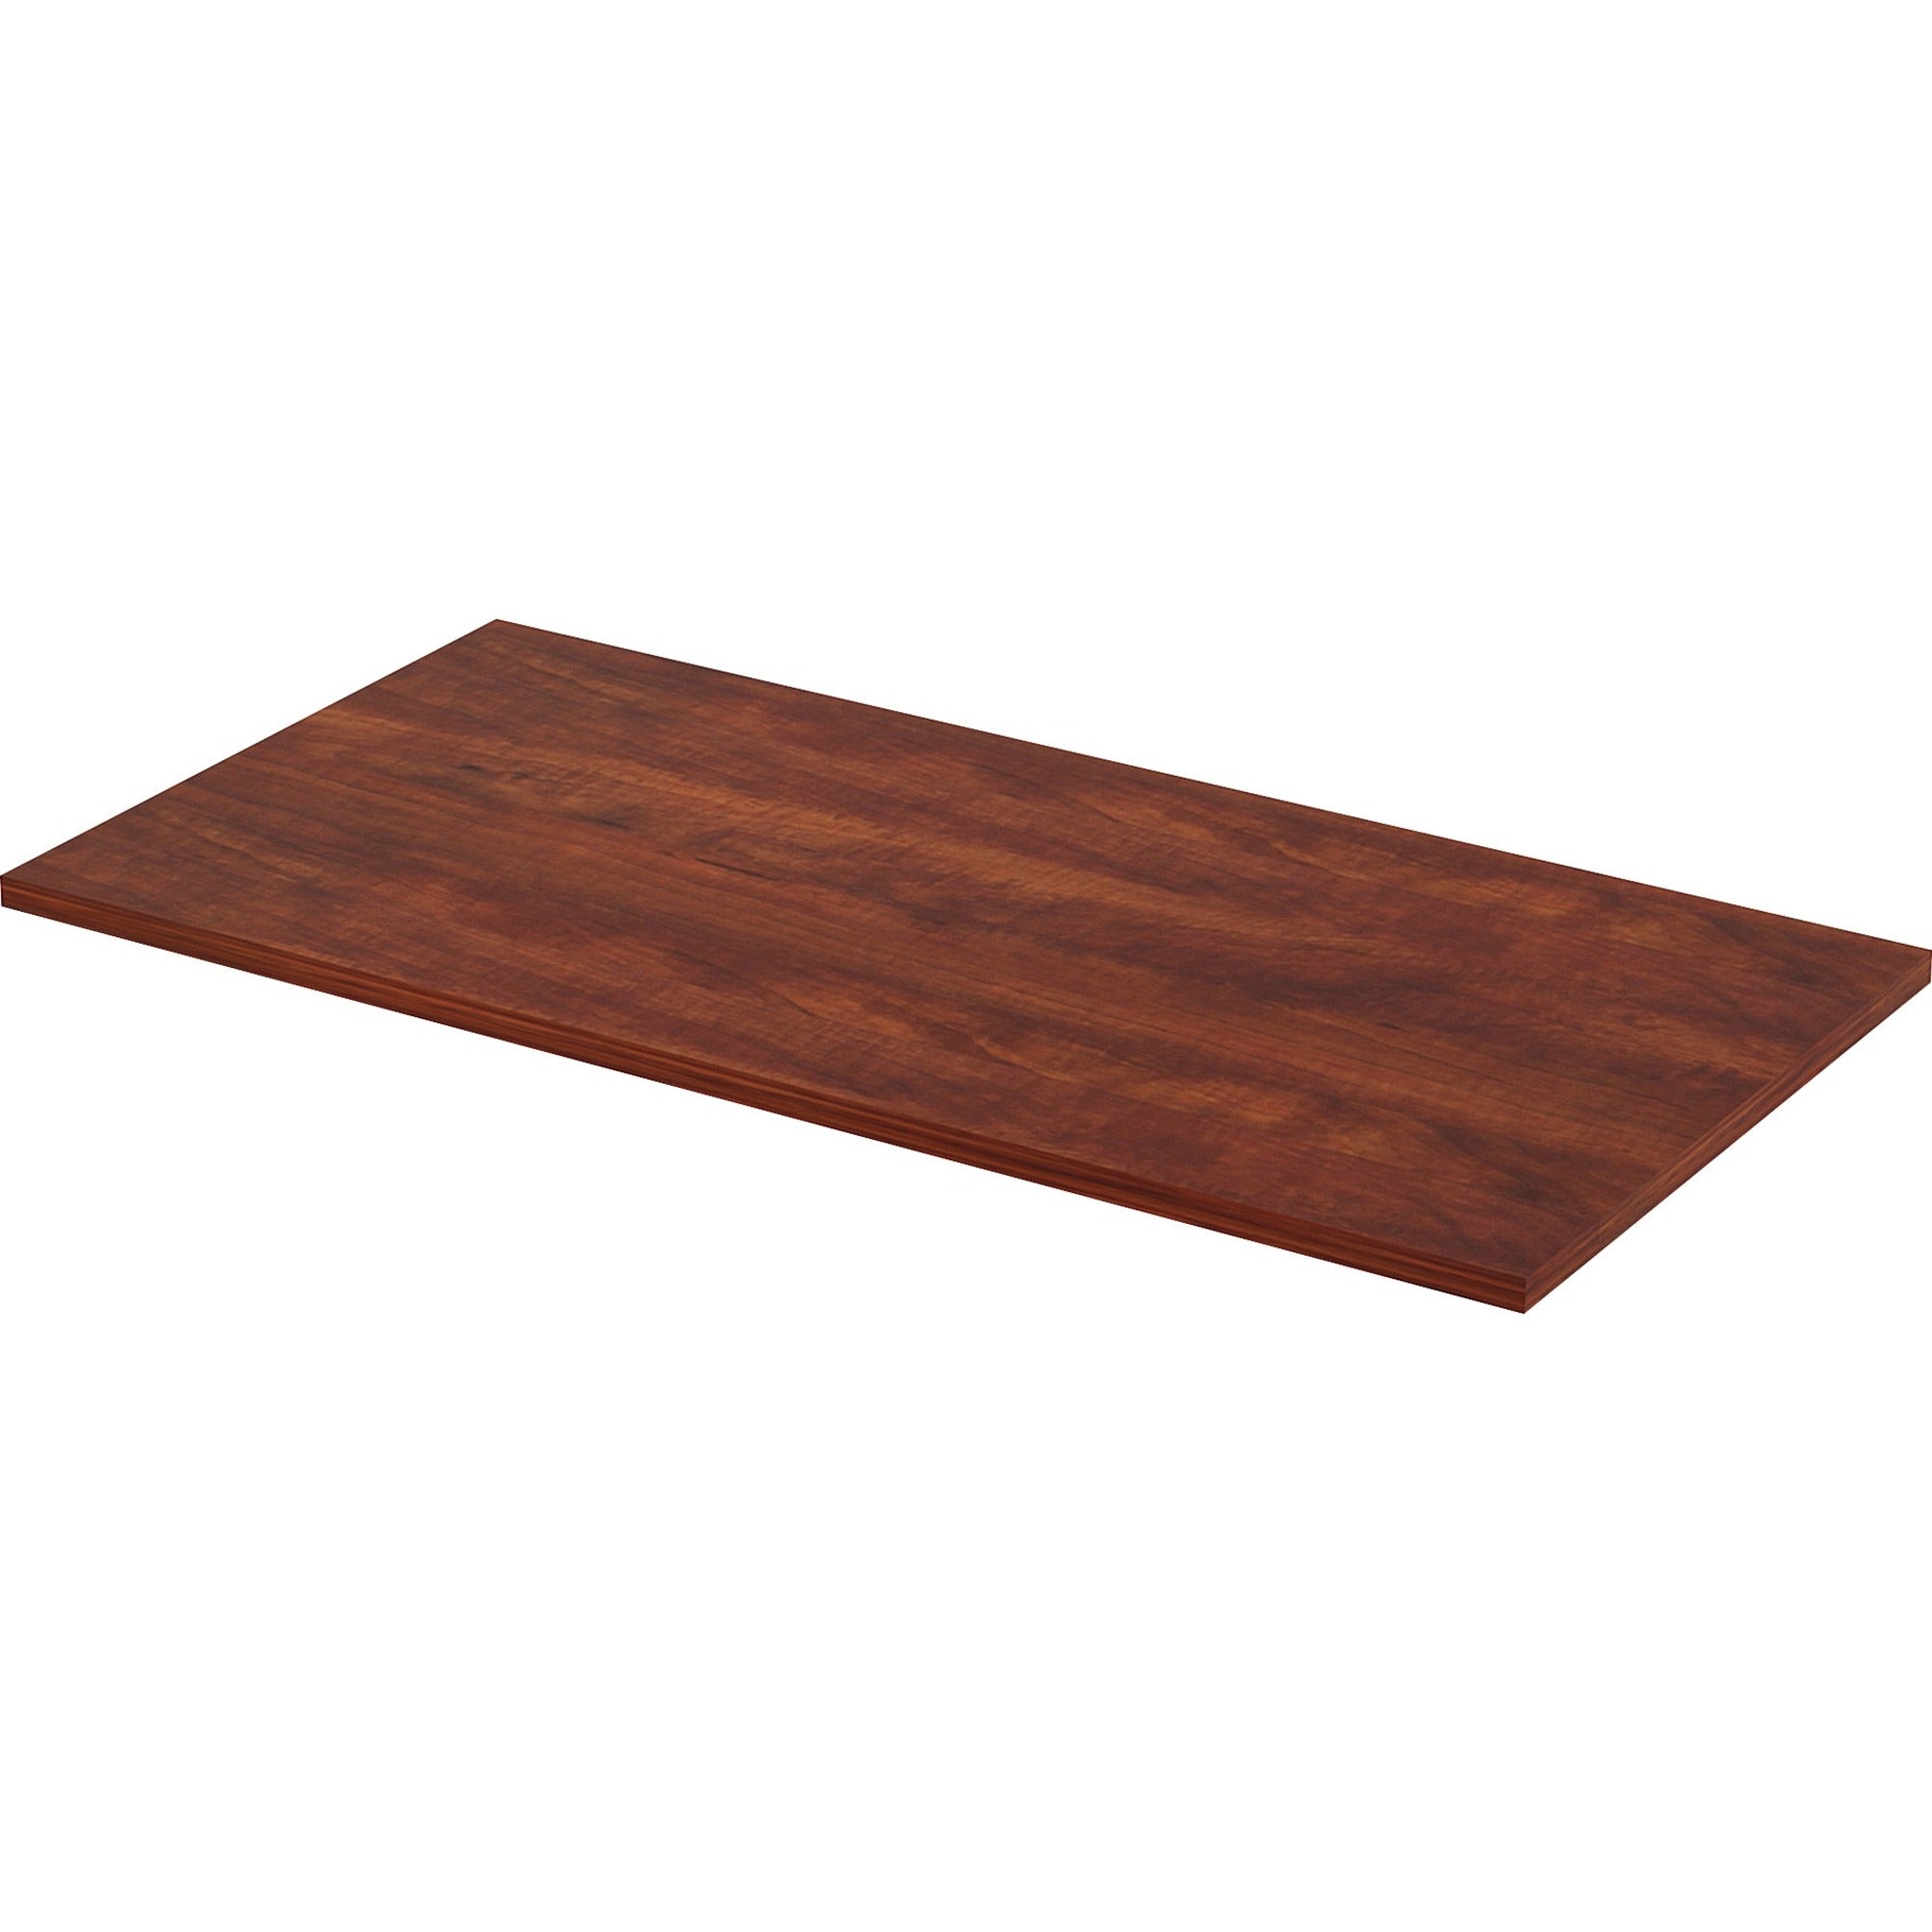 lorell-training-tabletop-for-table-topcherry-rectangle-laminated-top-48-table-top-length-x-24-table-top-width-x-1-table-top-thickness-assembly-required-1-each_llr59637 - 1